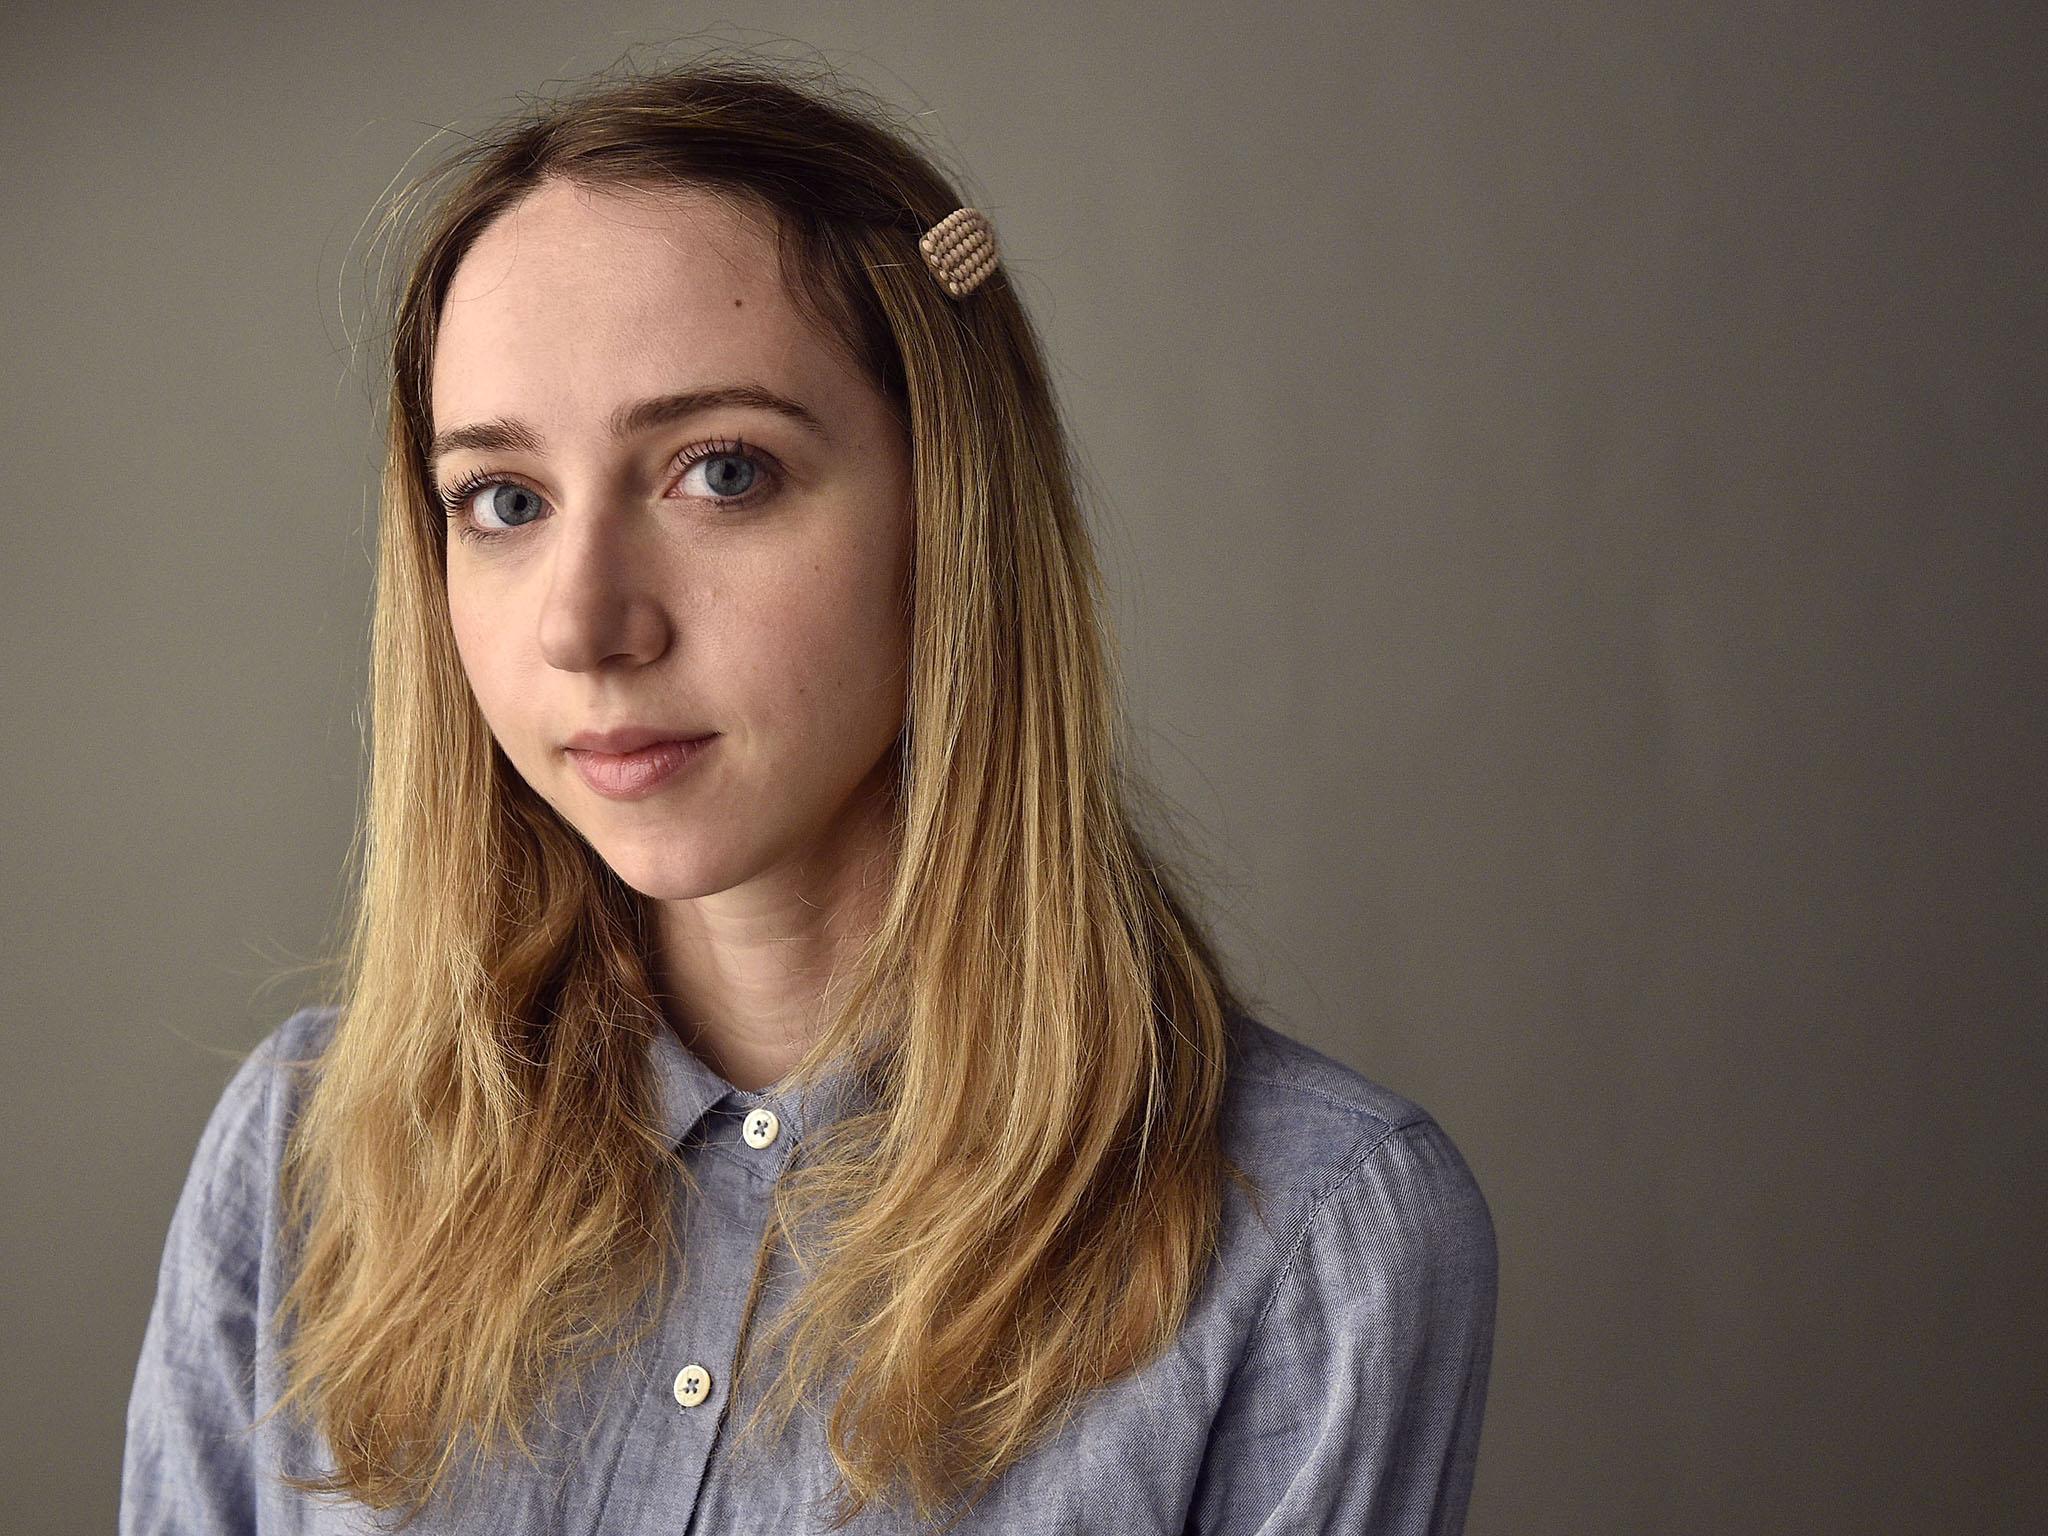 Zoe Kazan, who stars in 'The Big Sick', also has a Broadway play she's written, opening in the autumn